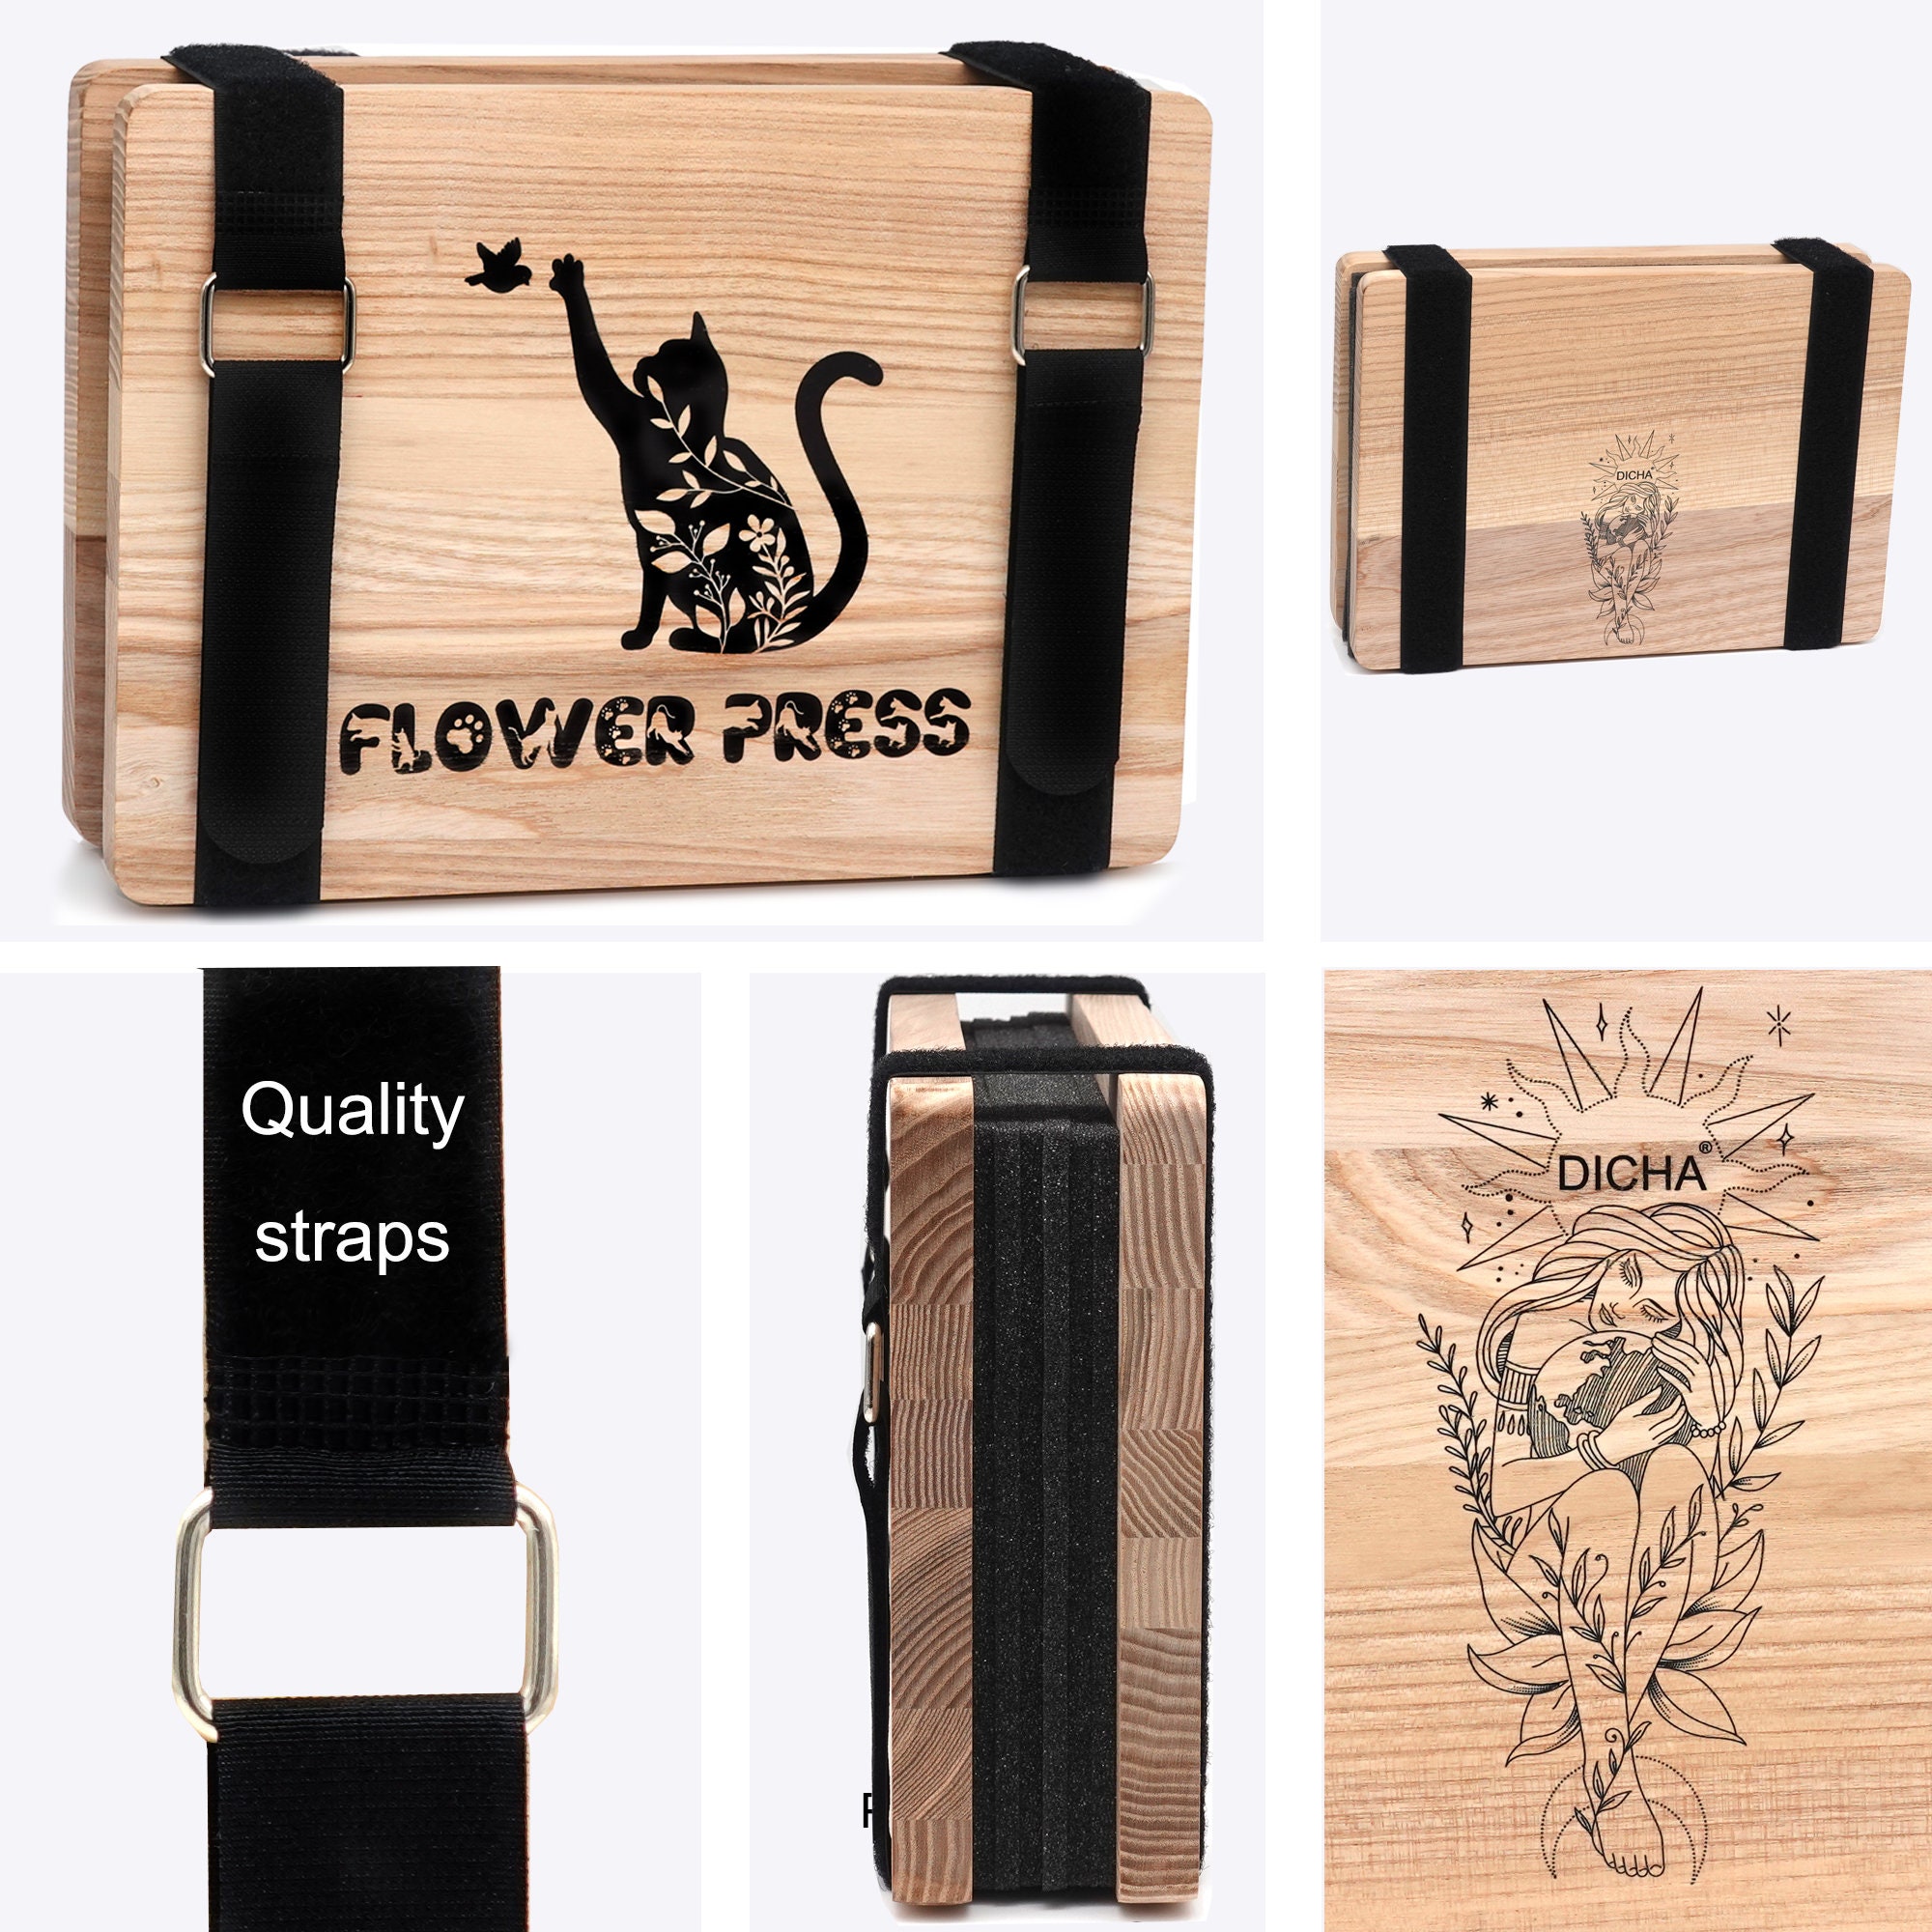 Microwave Flower Press Kit, Leaf Press, Plant Press, 6x9, Flower Pressing  Kit for Adults, With Herbarium Journal and Hemp Bag hand 